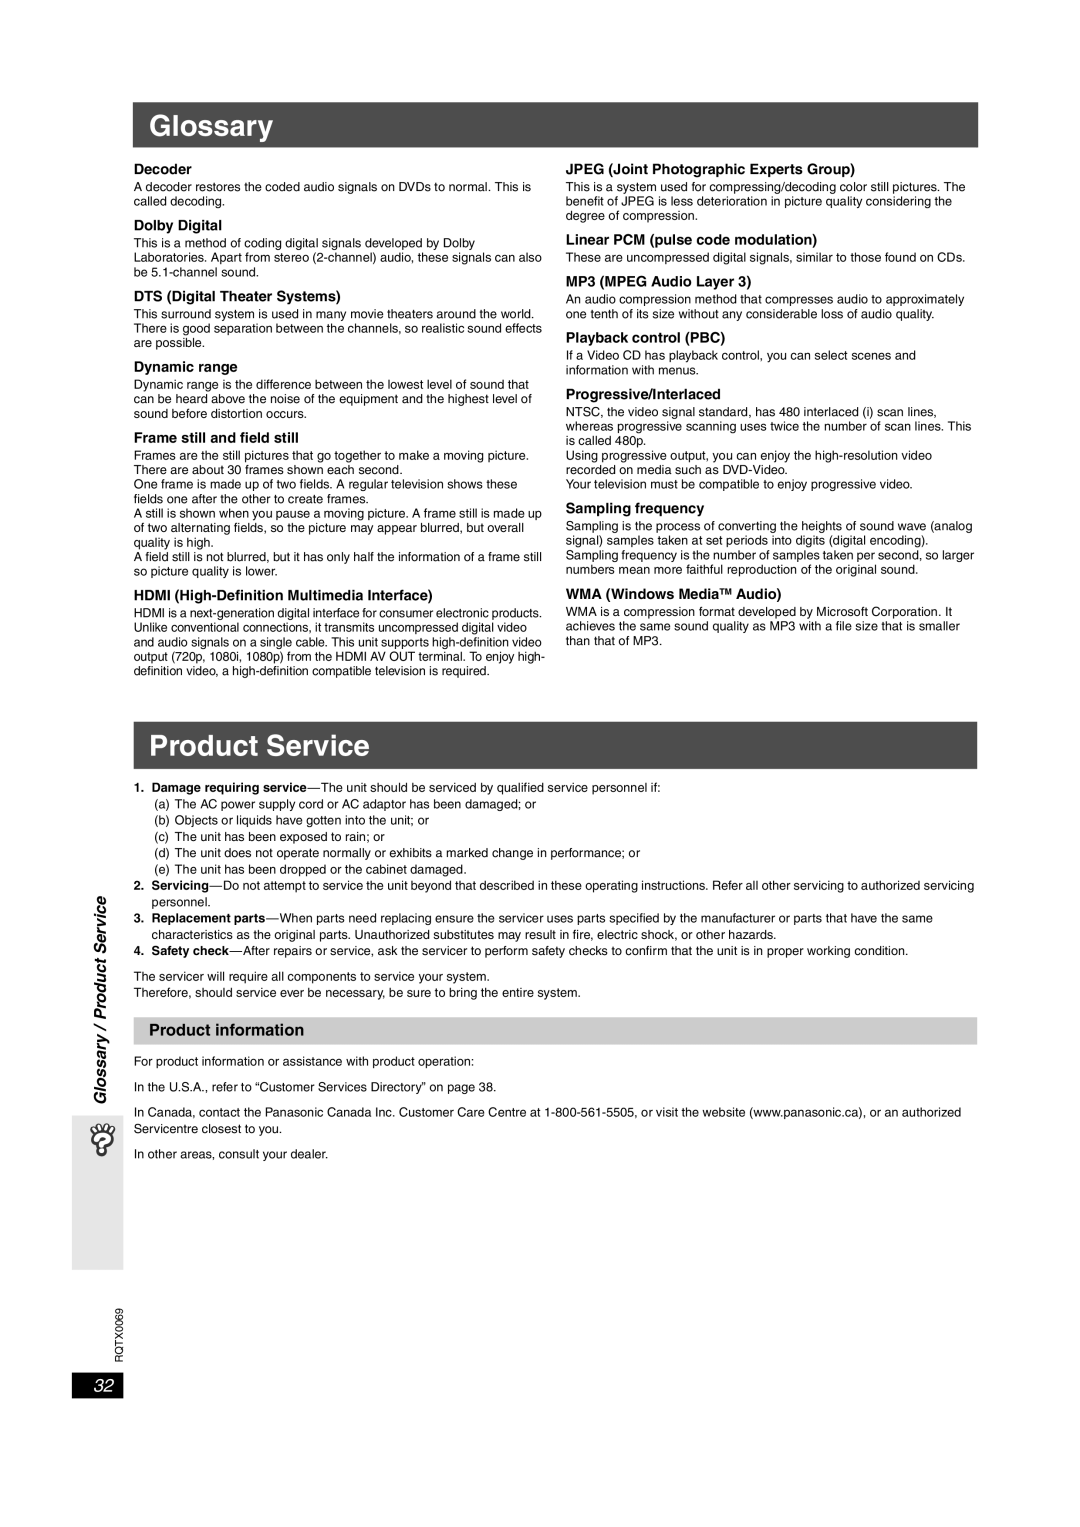 Panasonic SC-PT650 Glossary / Product Service, Product information, Decoder, Dolby Digital, Dynamic range 